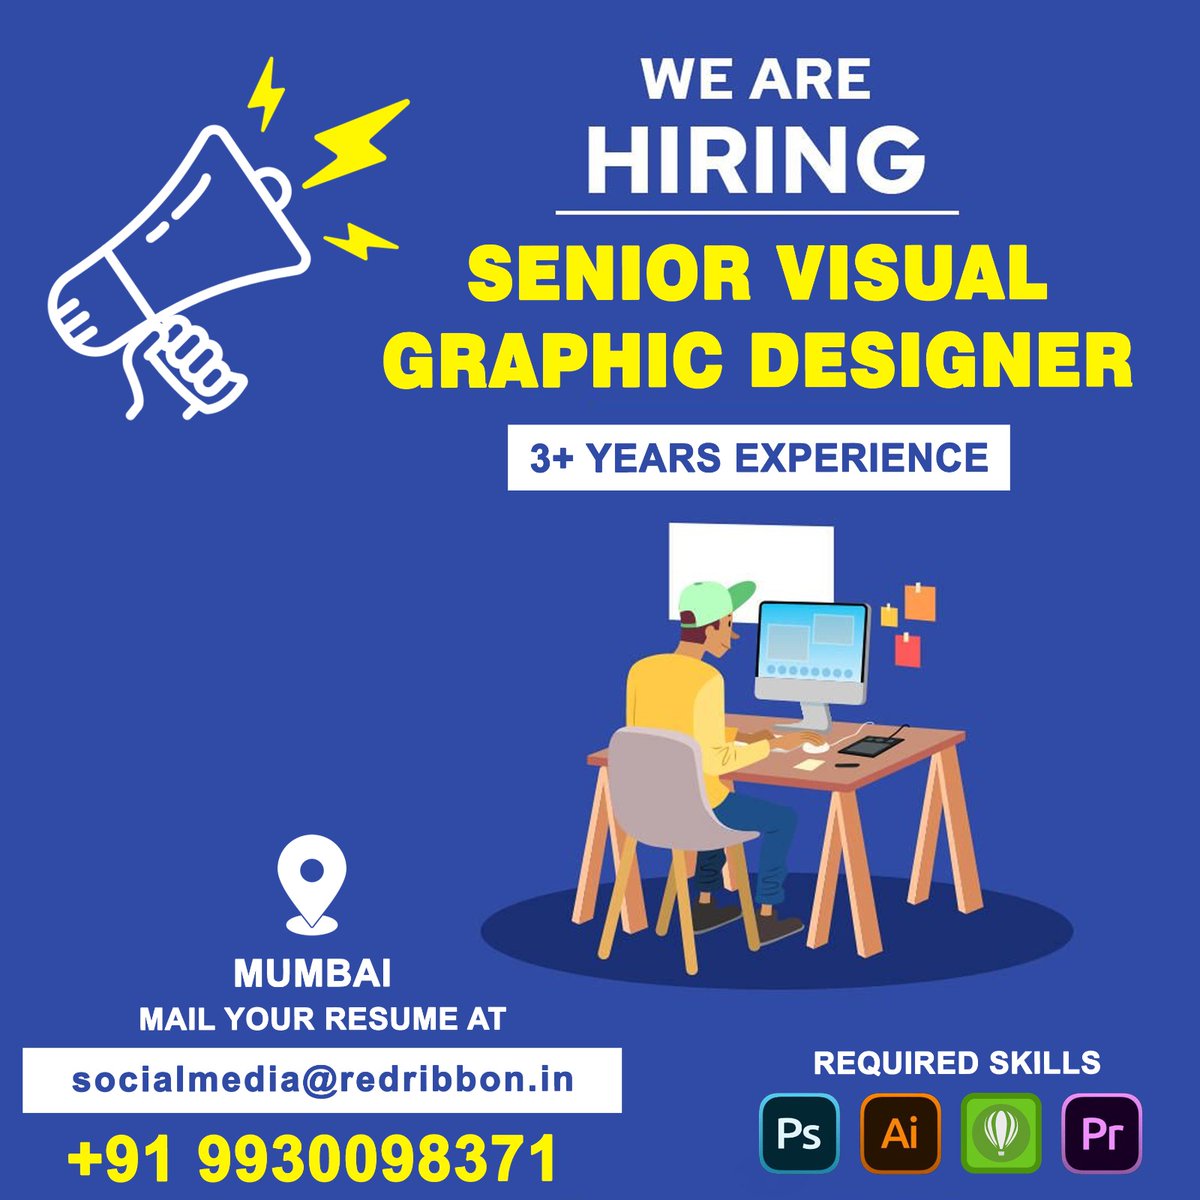 Join our creative journey! 

We're on the lookout for a Senior Visual Graphic Designer to bring innovation and style to our team. 

#HiringNow #JoinOurTeam #DesignJob #SeniorDesigner #CreativeOpportunity #DesignersWanted #DesignJobs #GraphicDesigner #NowHiring #DesignCommunity